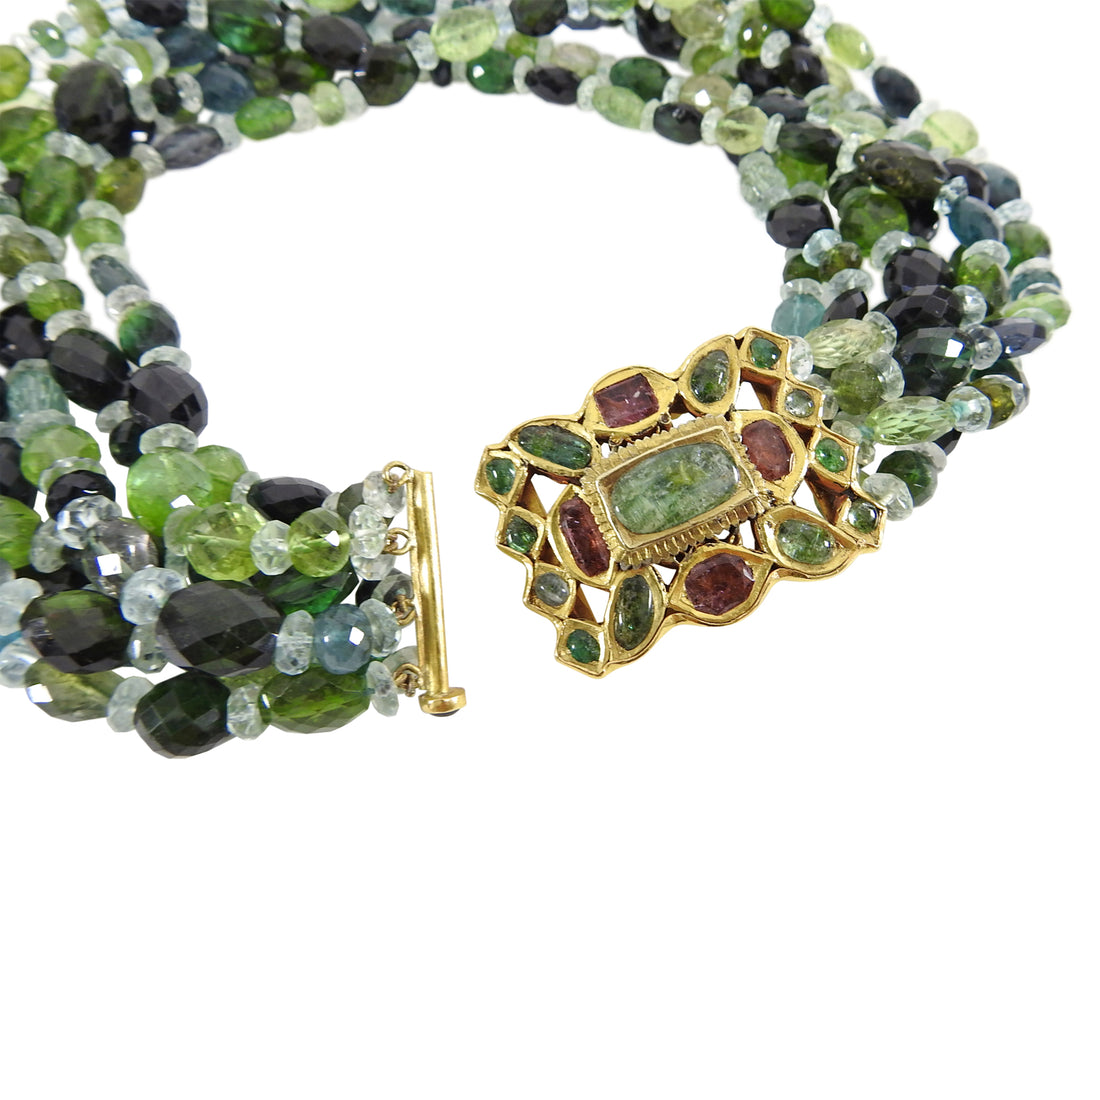 Eileen Coyne 22k Gold and Green Tourmaline Multi Strand Bead Necklace